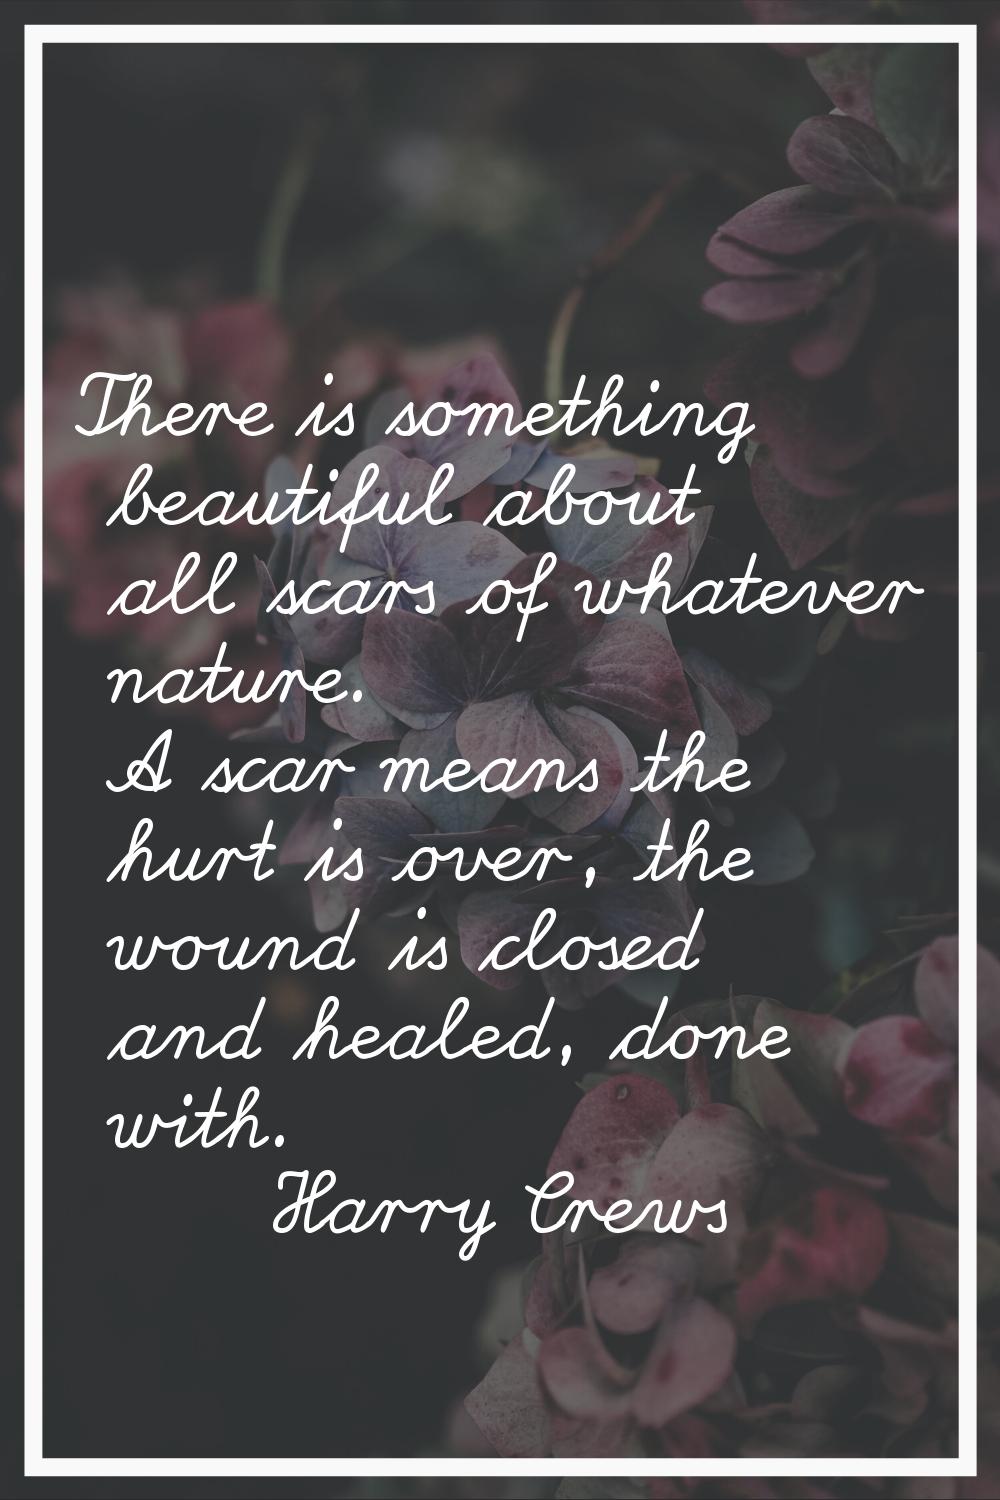 There is something beautiful about all scars of whatever nature. A scar means the hurt is over, the